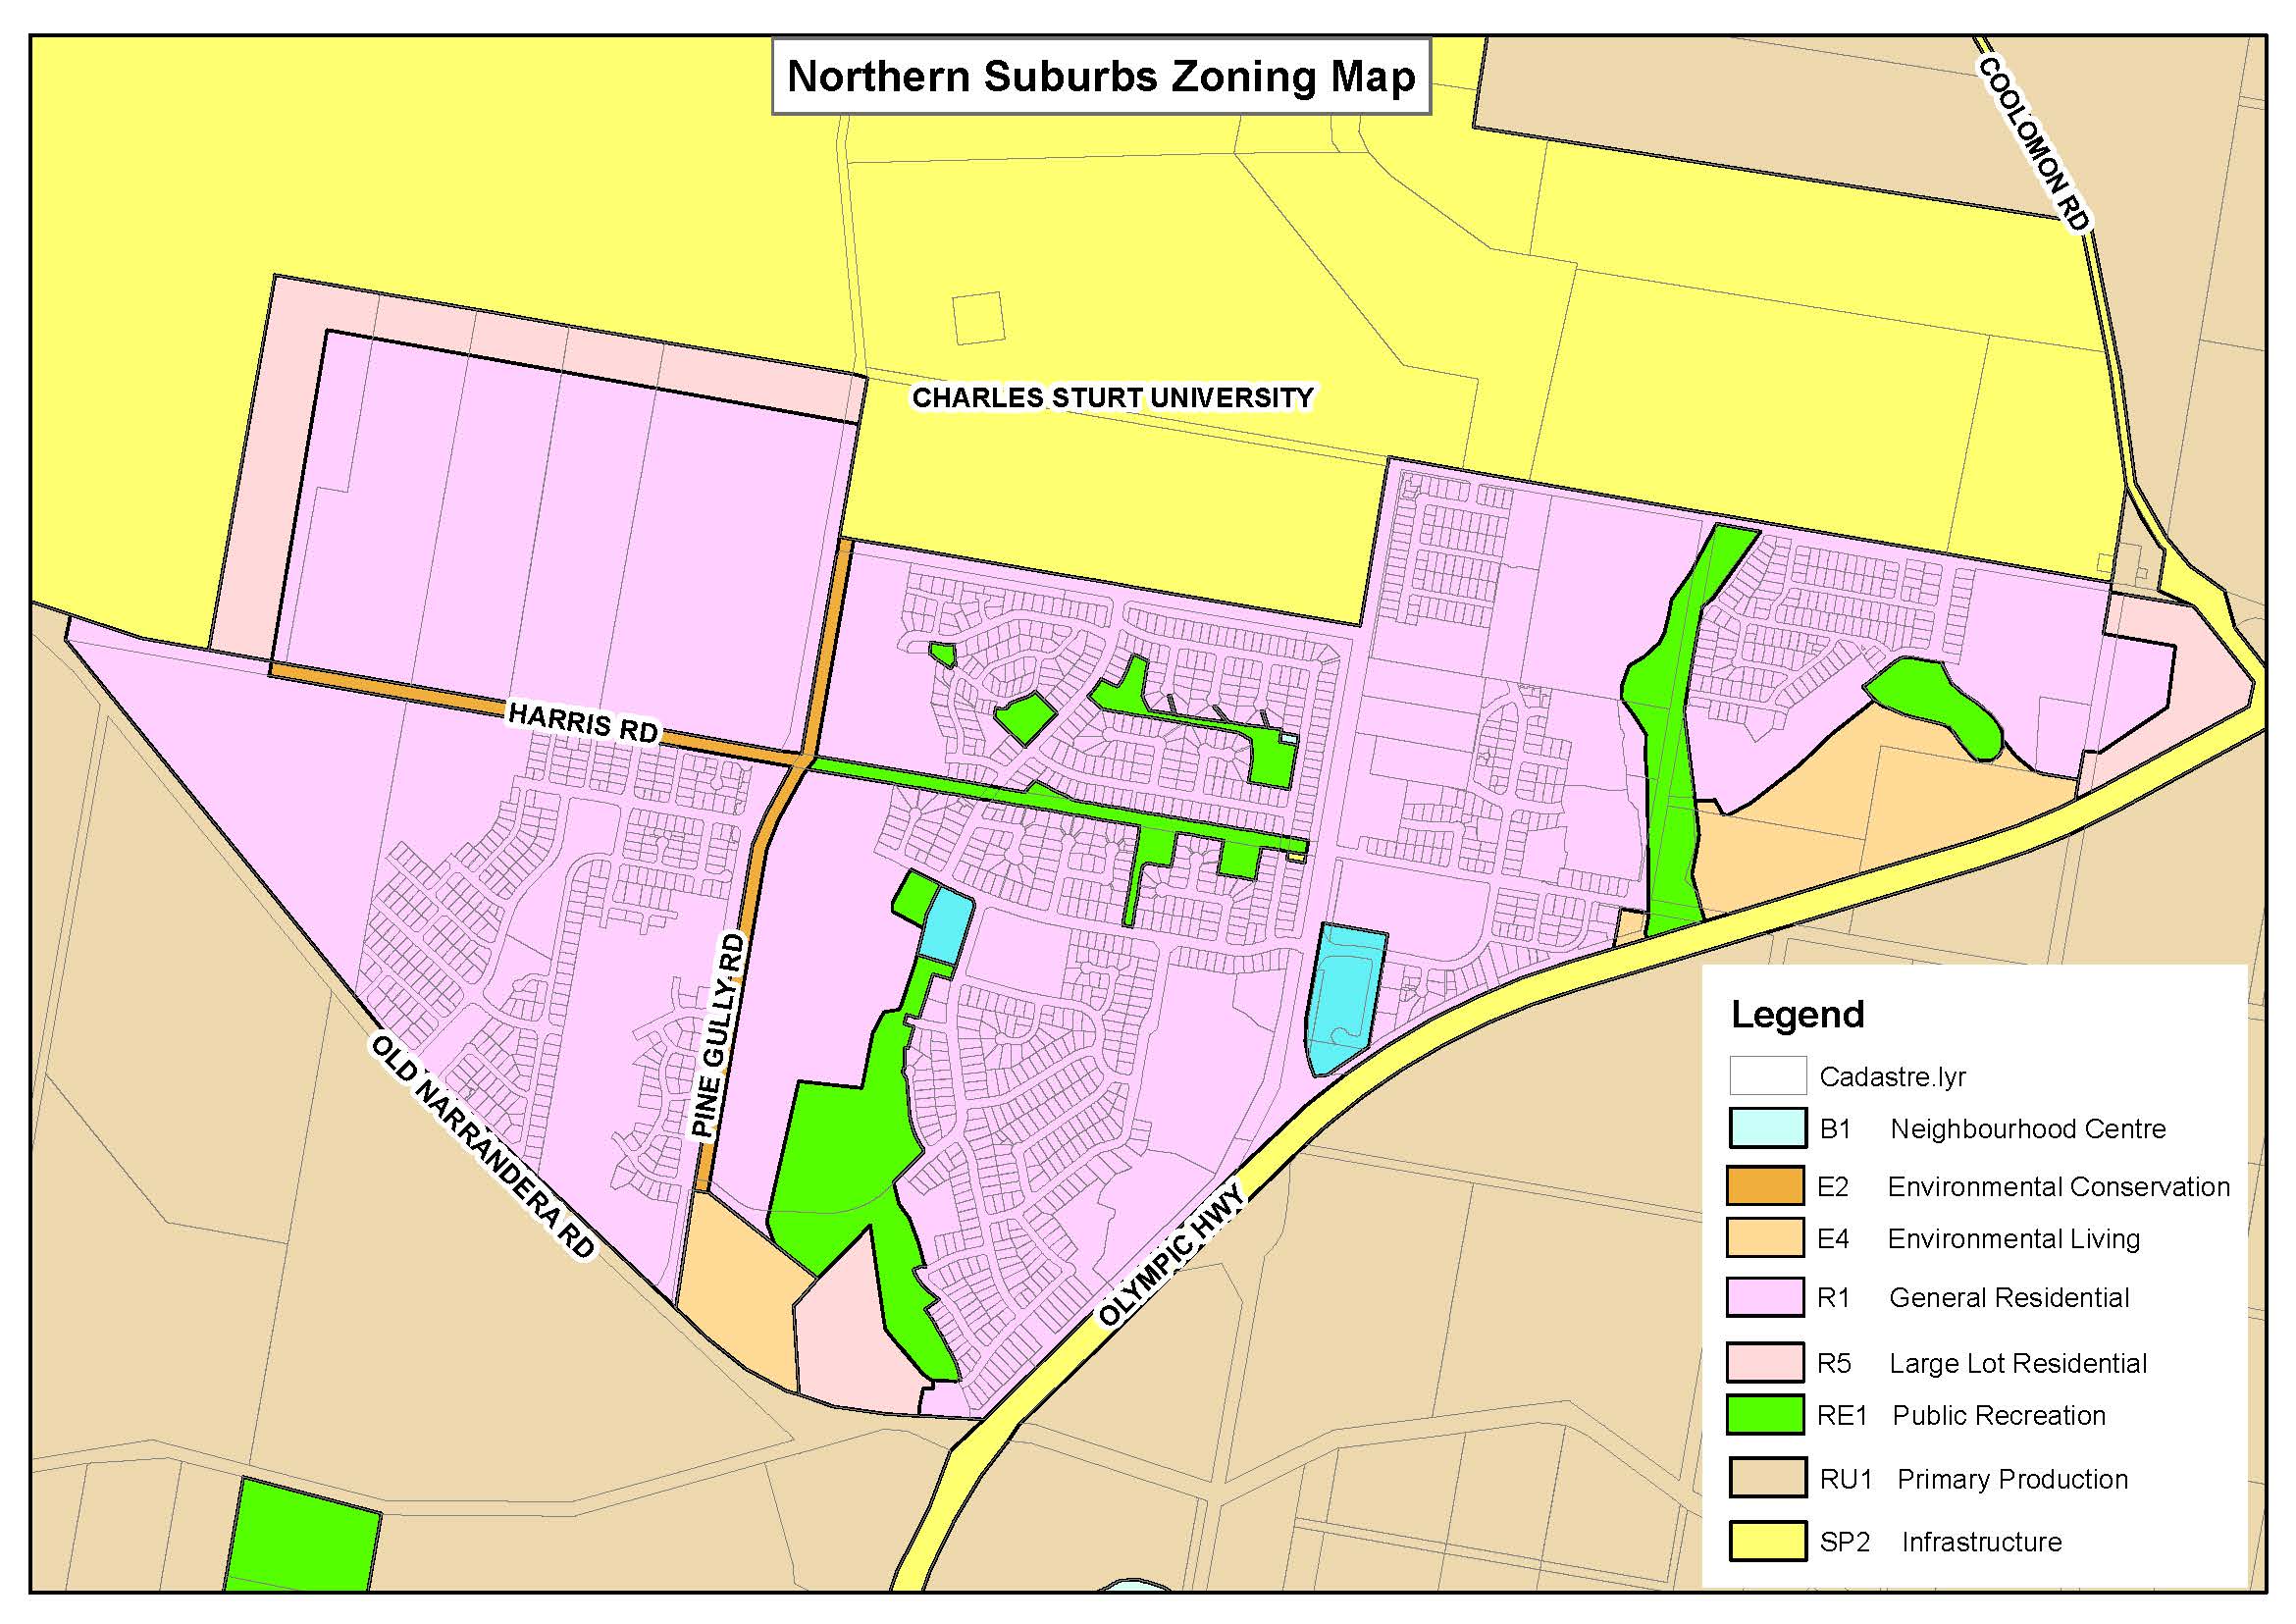 Northern Suburbs Zoning Map